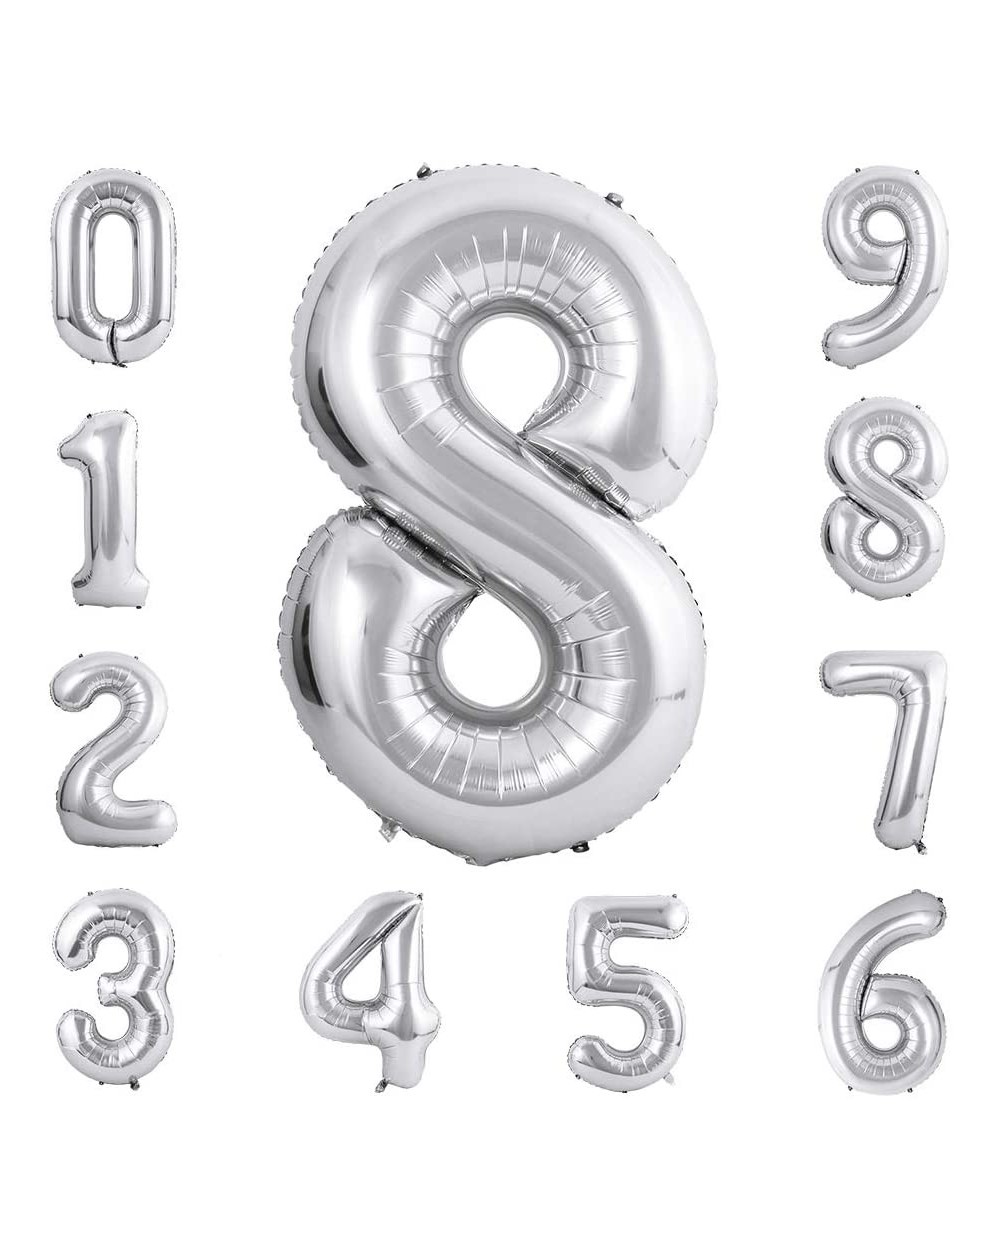 Balloons Large Number Balloons 40 inch Decoration for Birthday Anniversary Festival Party(Silver Number 8) - Silver_8 - CT18S...